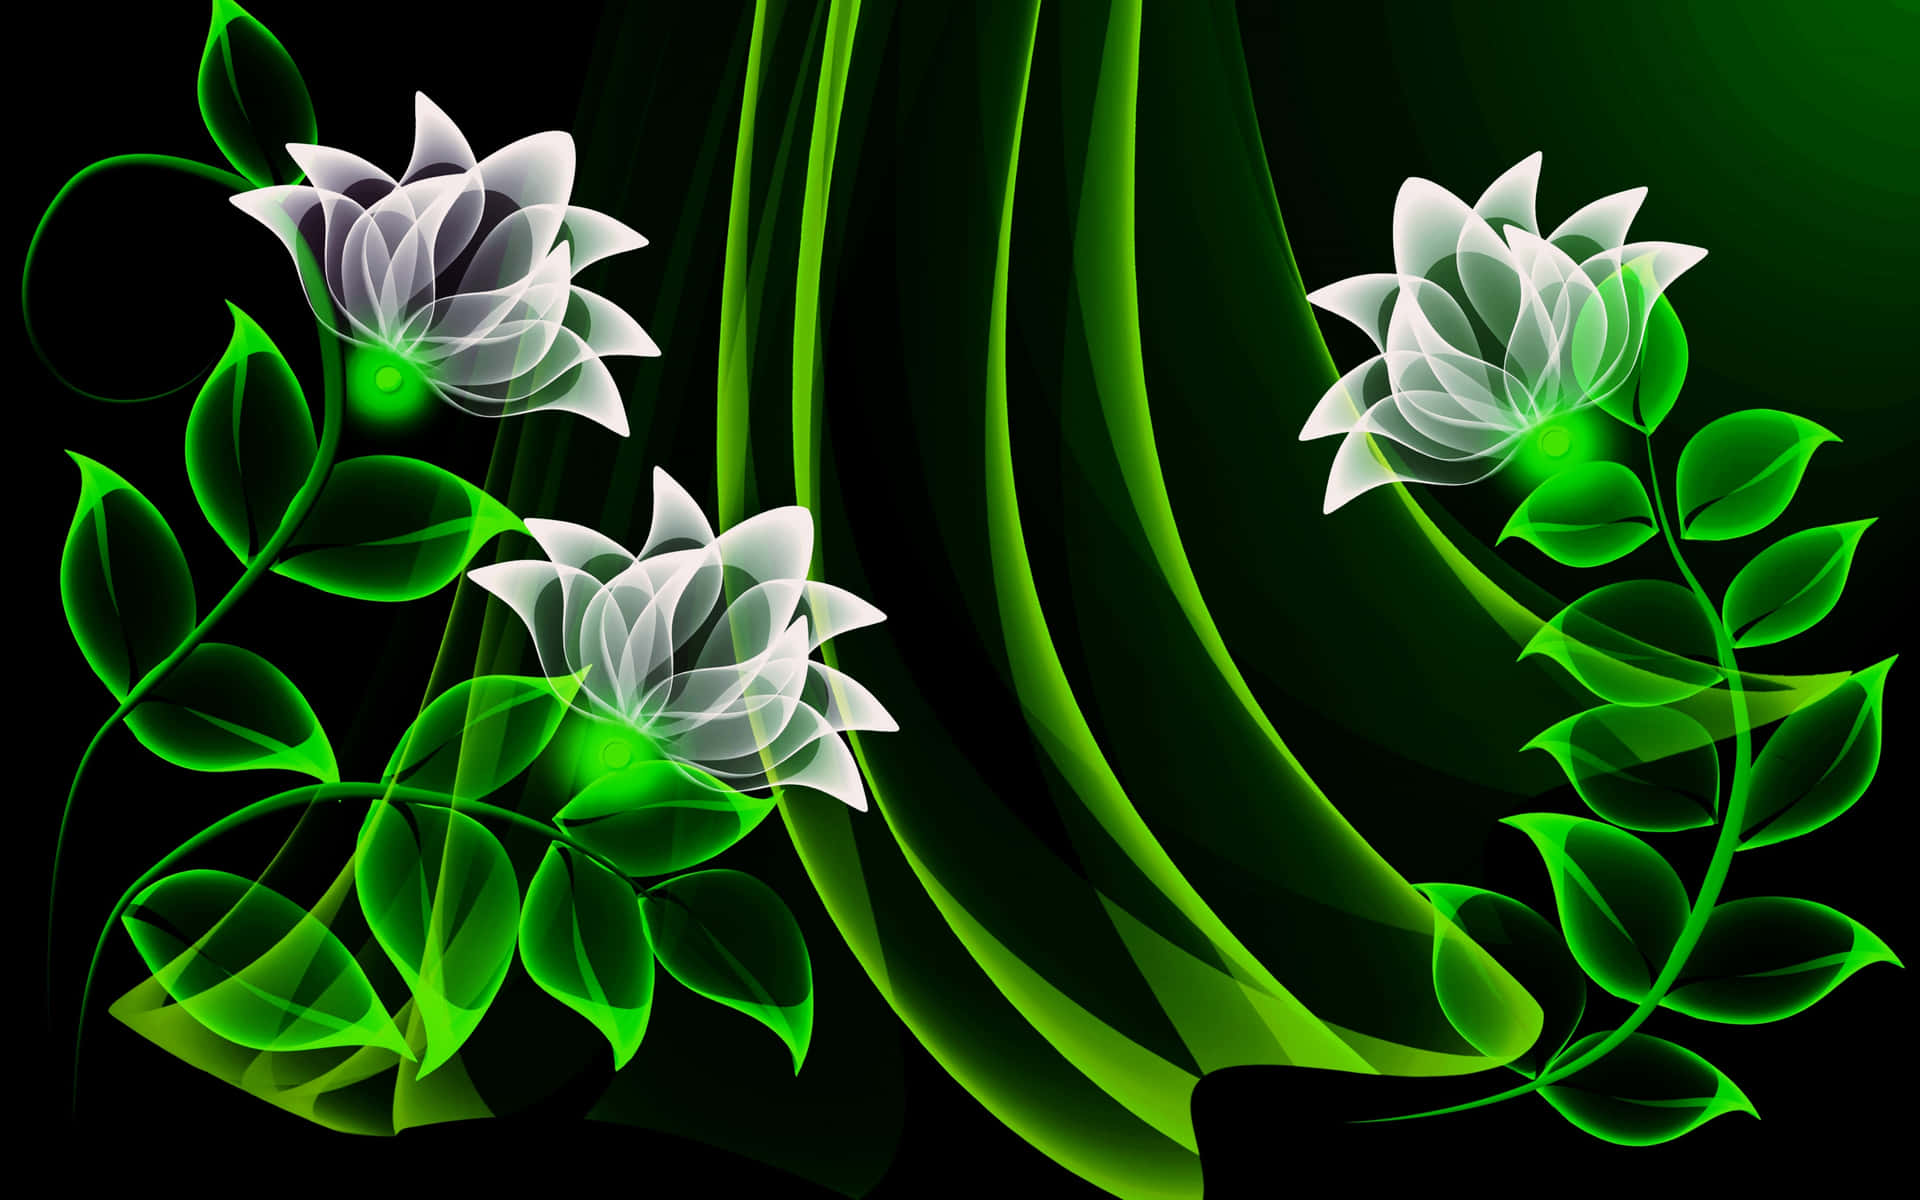 Abstract Neon Floral Design4 K Wallpaper